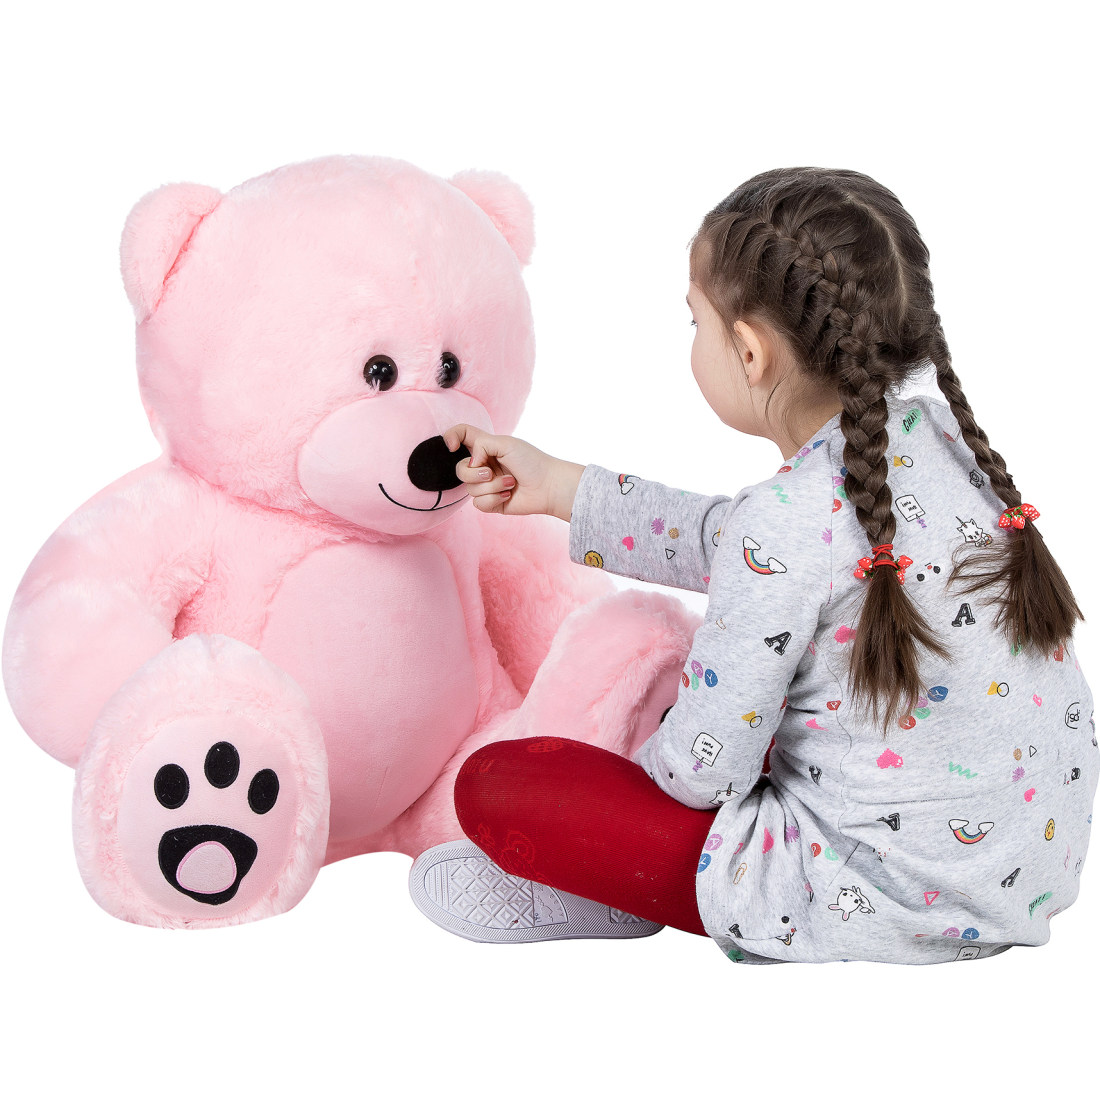 10 Teddy Day Gift Ideas: Adorable Ways to Express Your Love - The Economic  Times